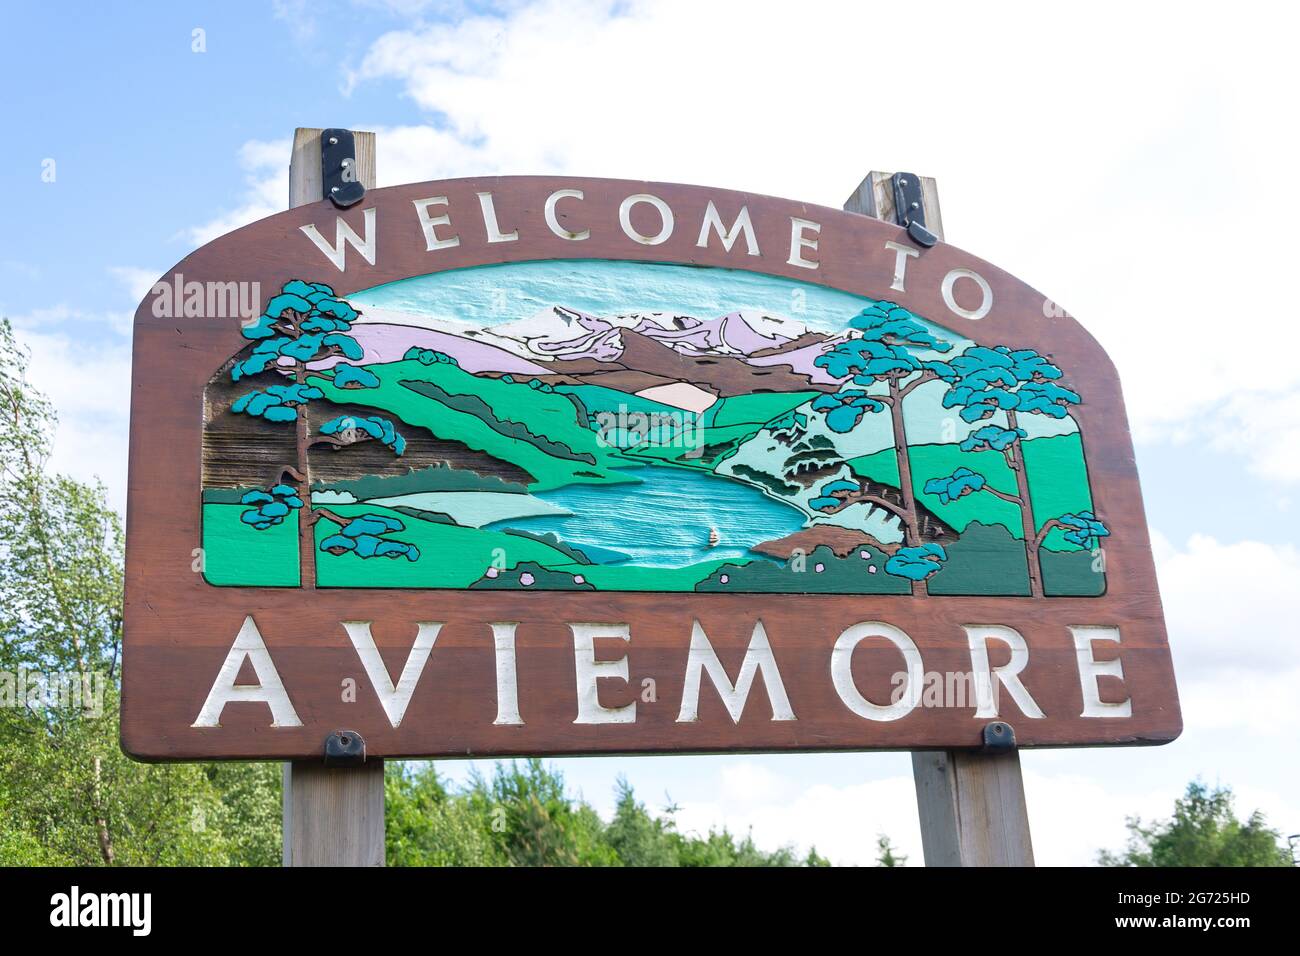 Welcome to Aviemore sign, Aviemore, Cairngorms National Park, Highland, Scotland, United Kingdom Stock Photo